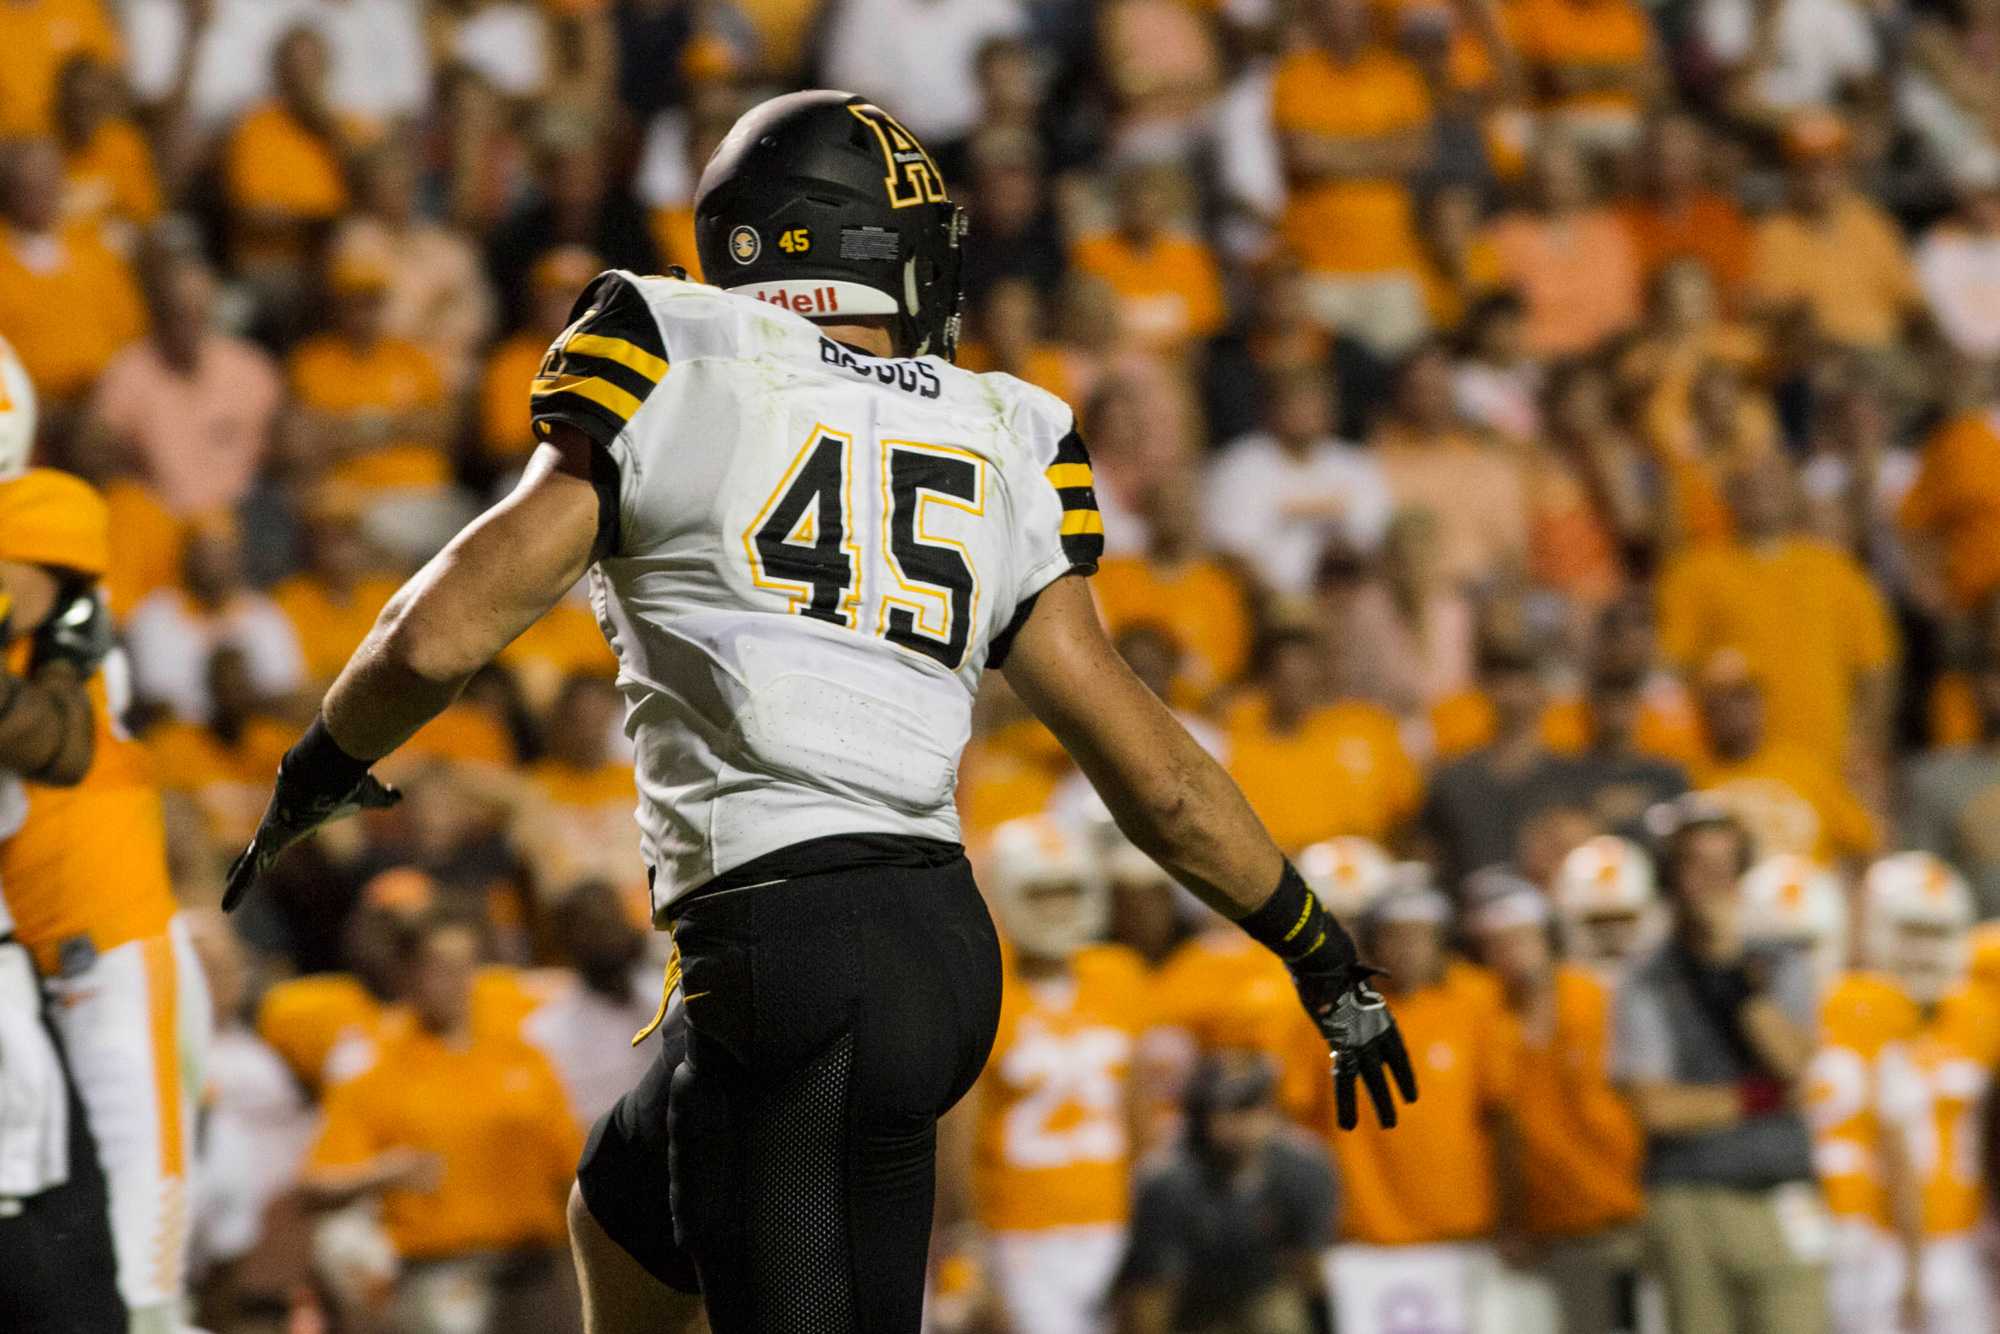 Junior Inside Linebacker, Eric Boggs, looks back towards his teammates during the game against Tennesse in 2016. The Mountaineers lost the away game in overtime with the final score being 20-13.